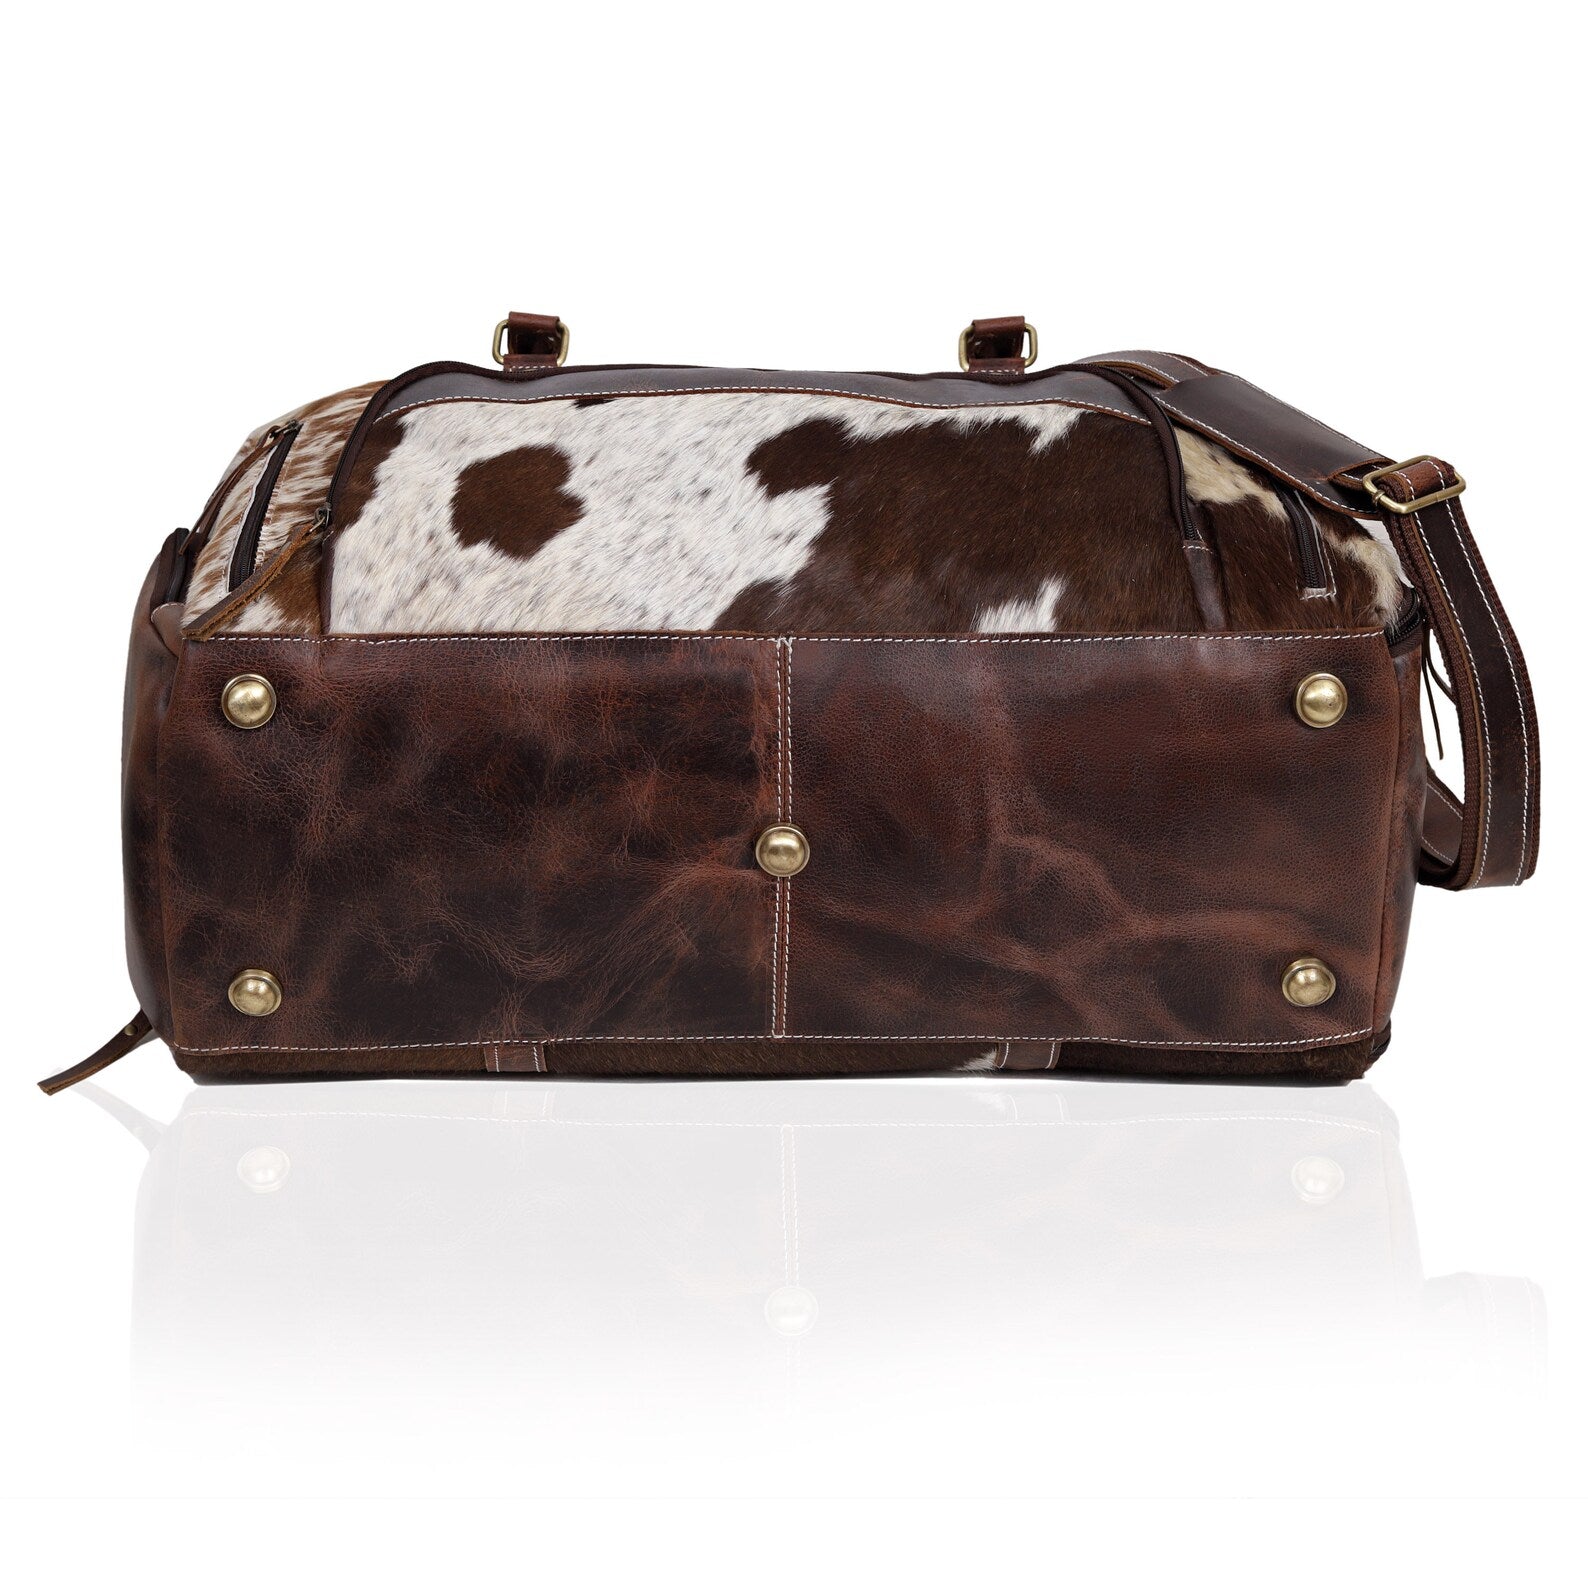 Make a statement with this cowhide overnight bag, your symbol of refined luxury.